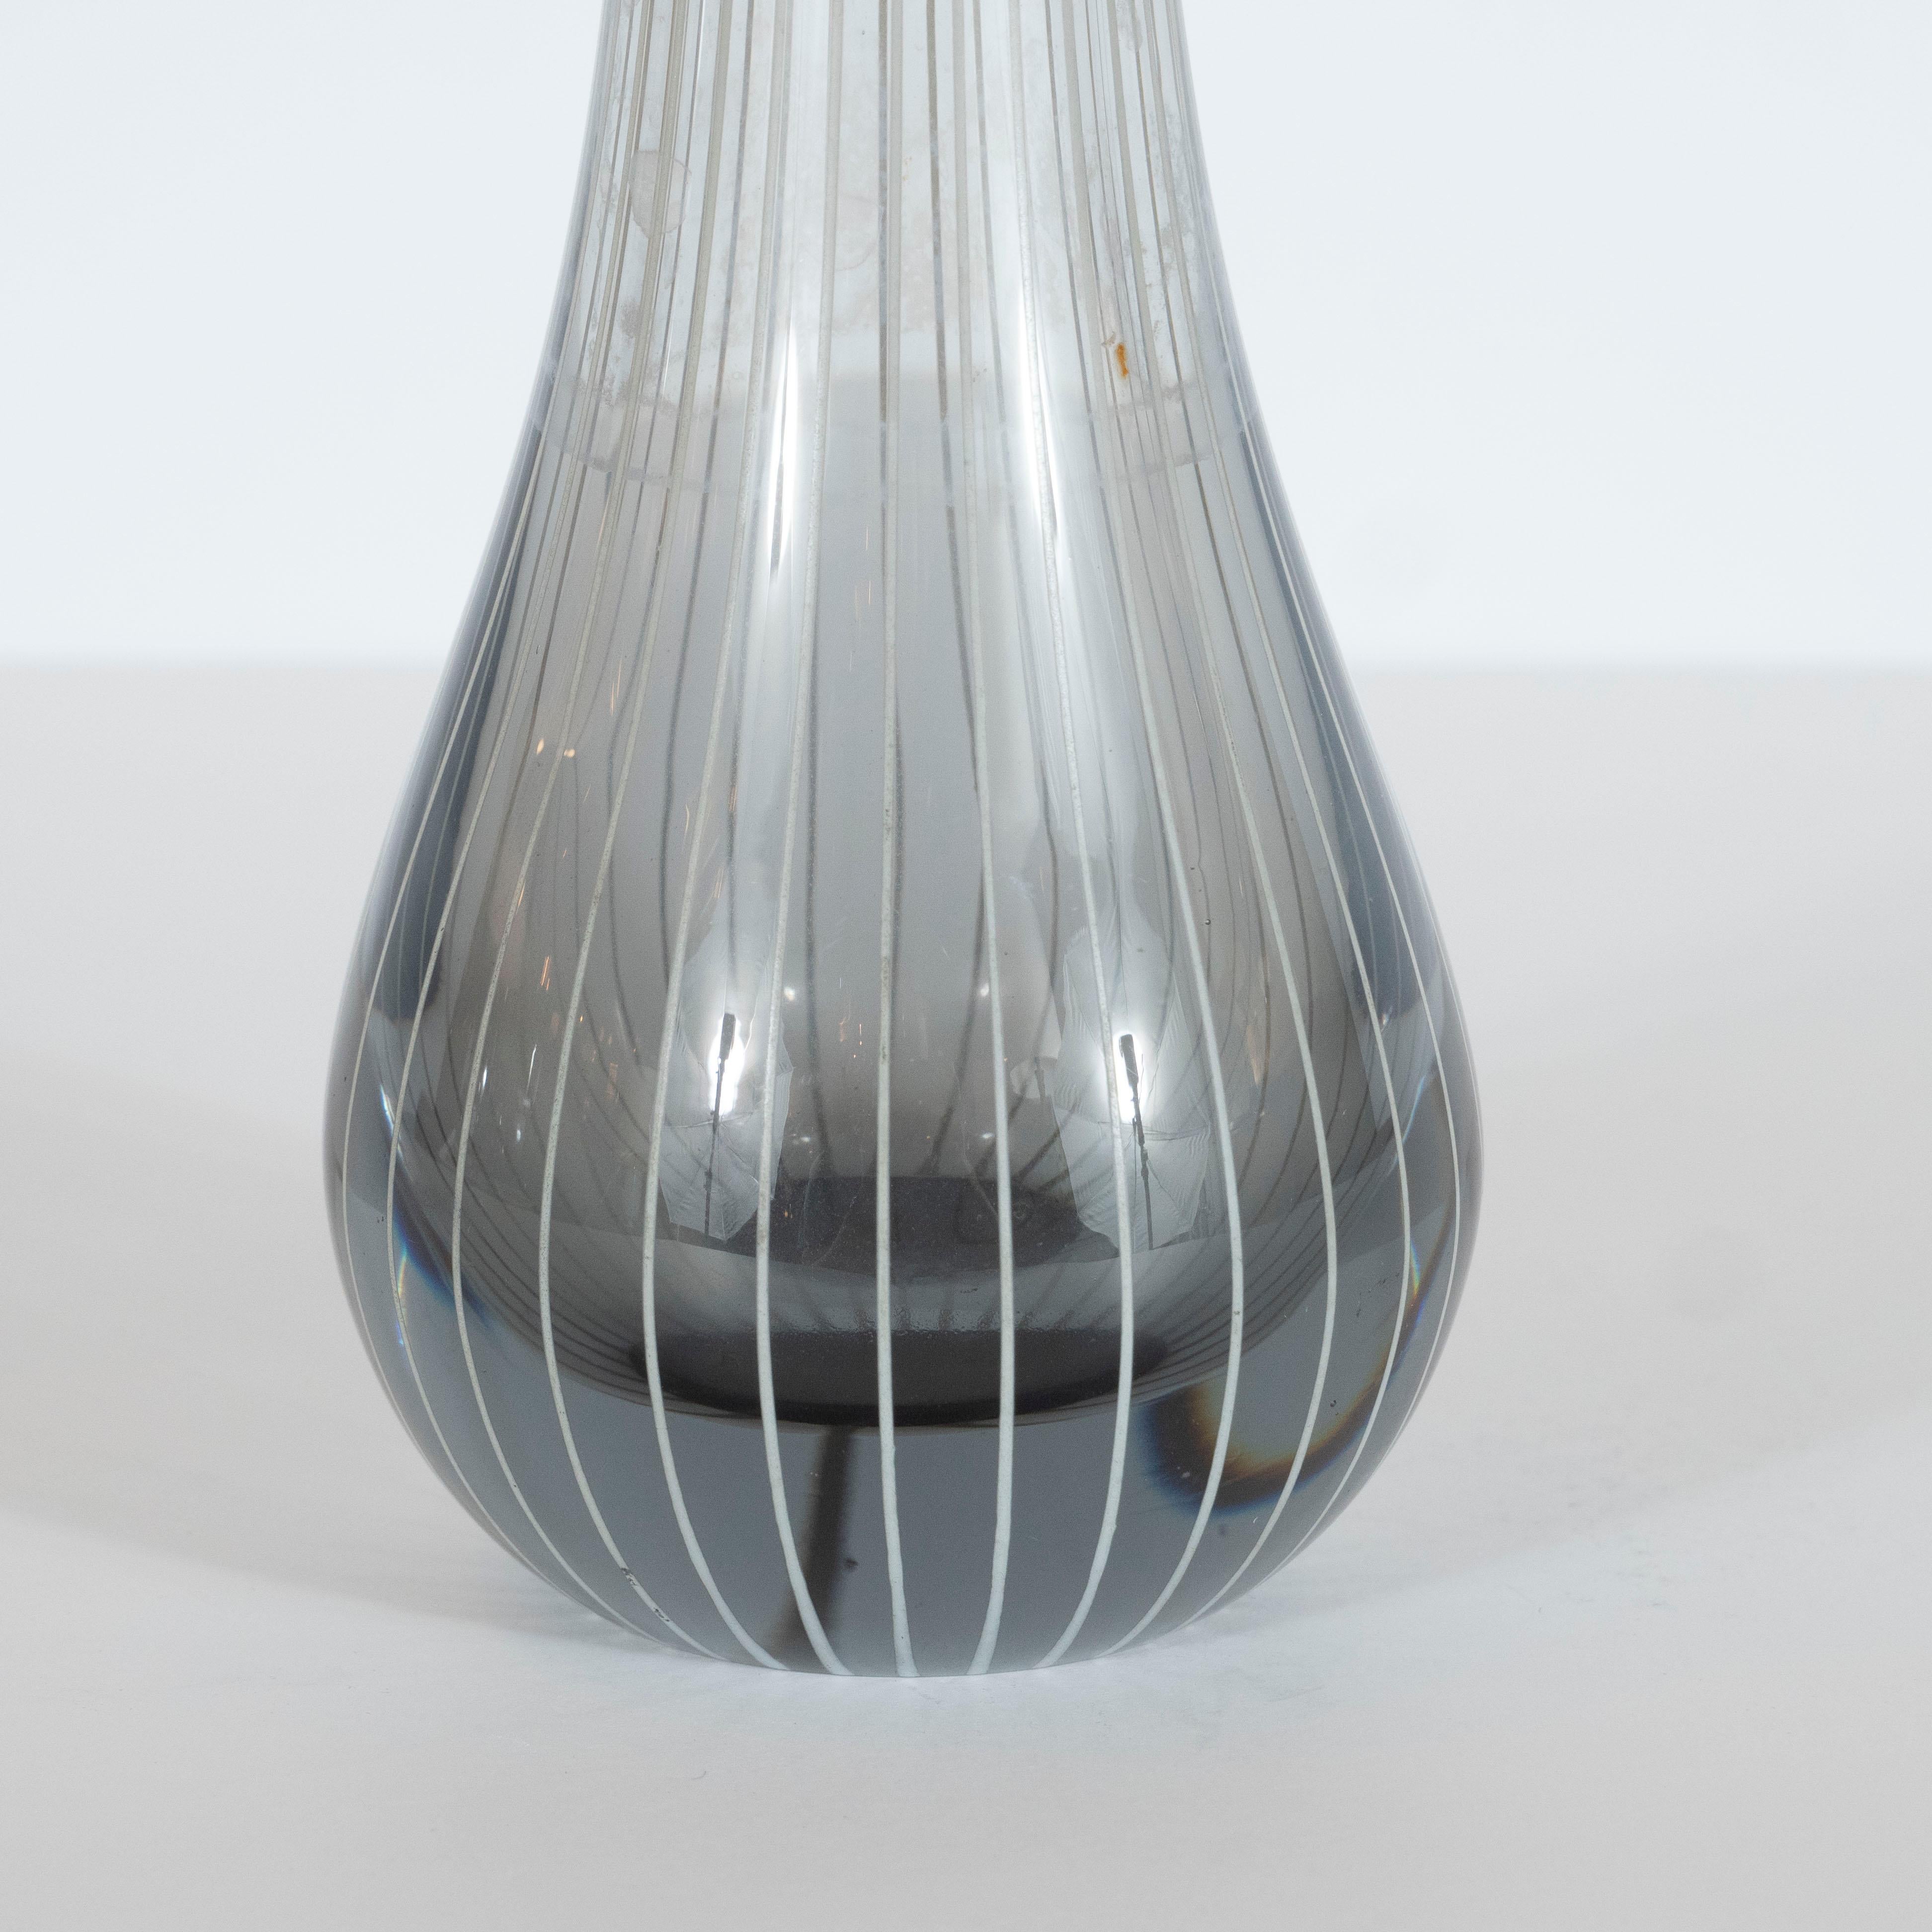 This elegant Mid-Century Modern vase was hand blown in Sweden, circa 1960. It features a undulating angular mouth and slender neck that expands into a protuberant base handblown in a sultry smoked translucent glass. The glass is striated with evenly